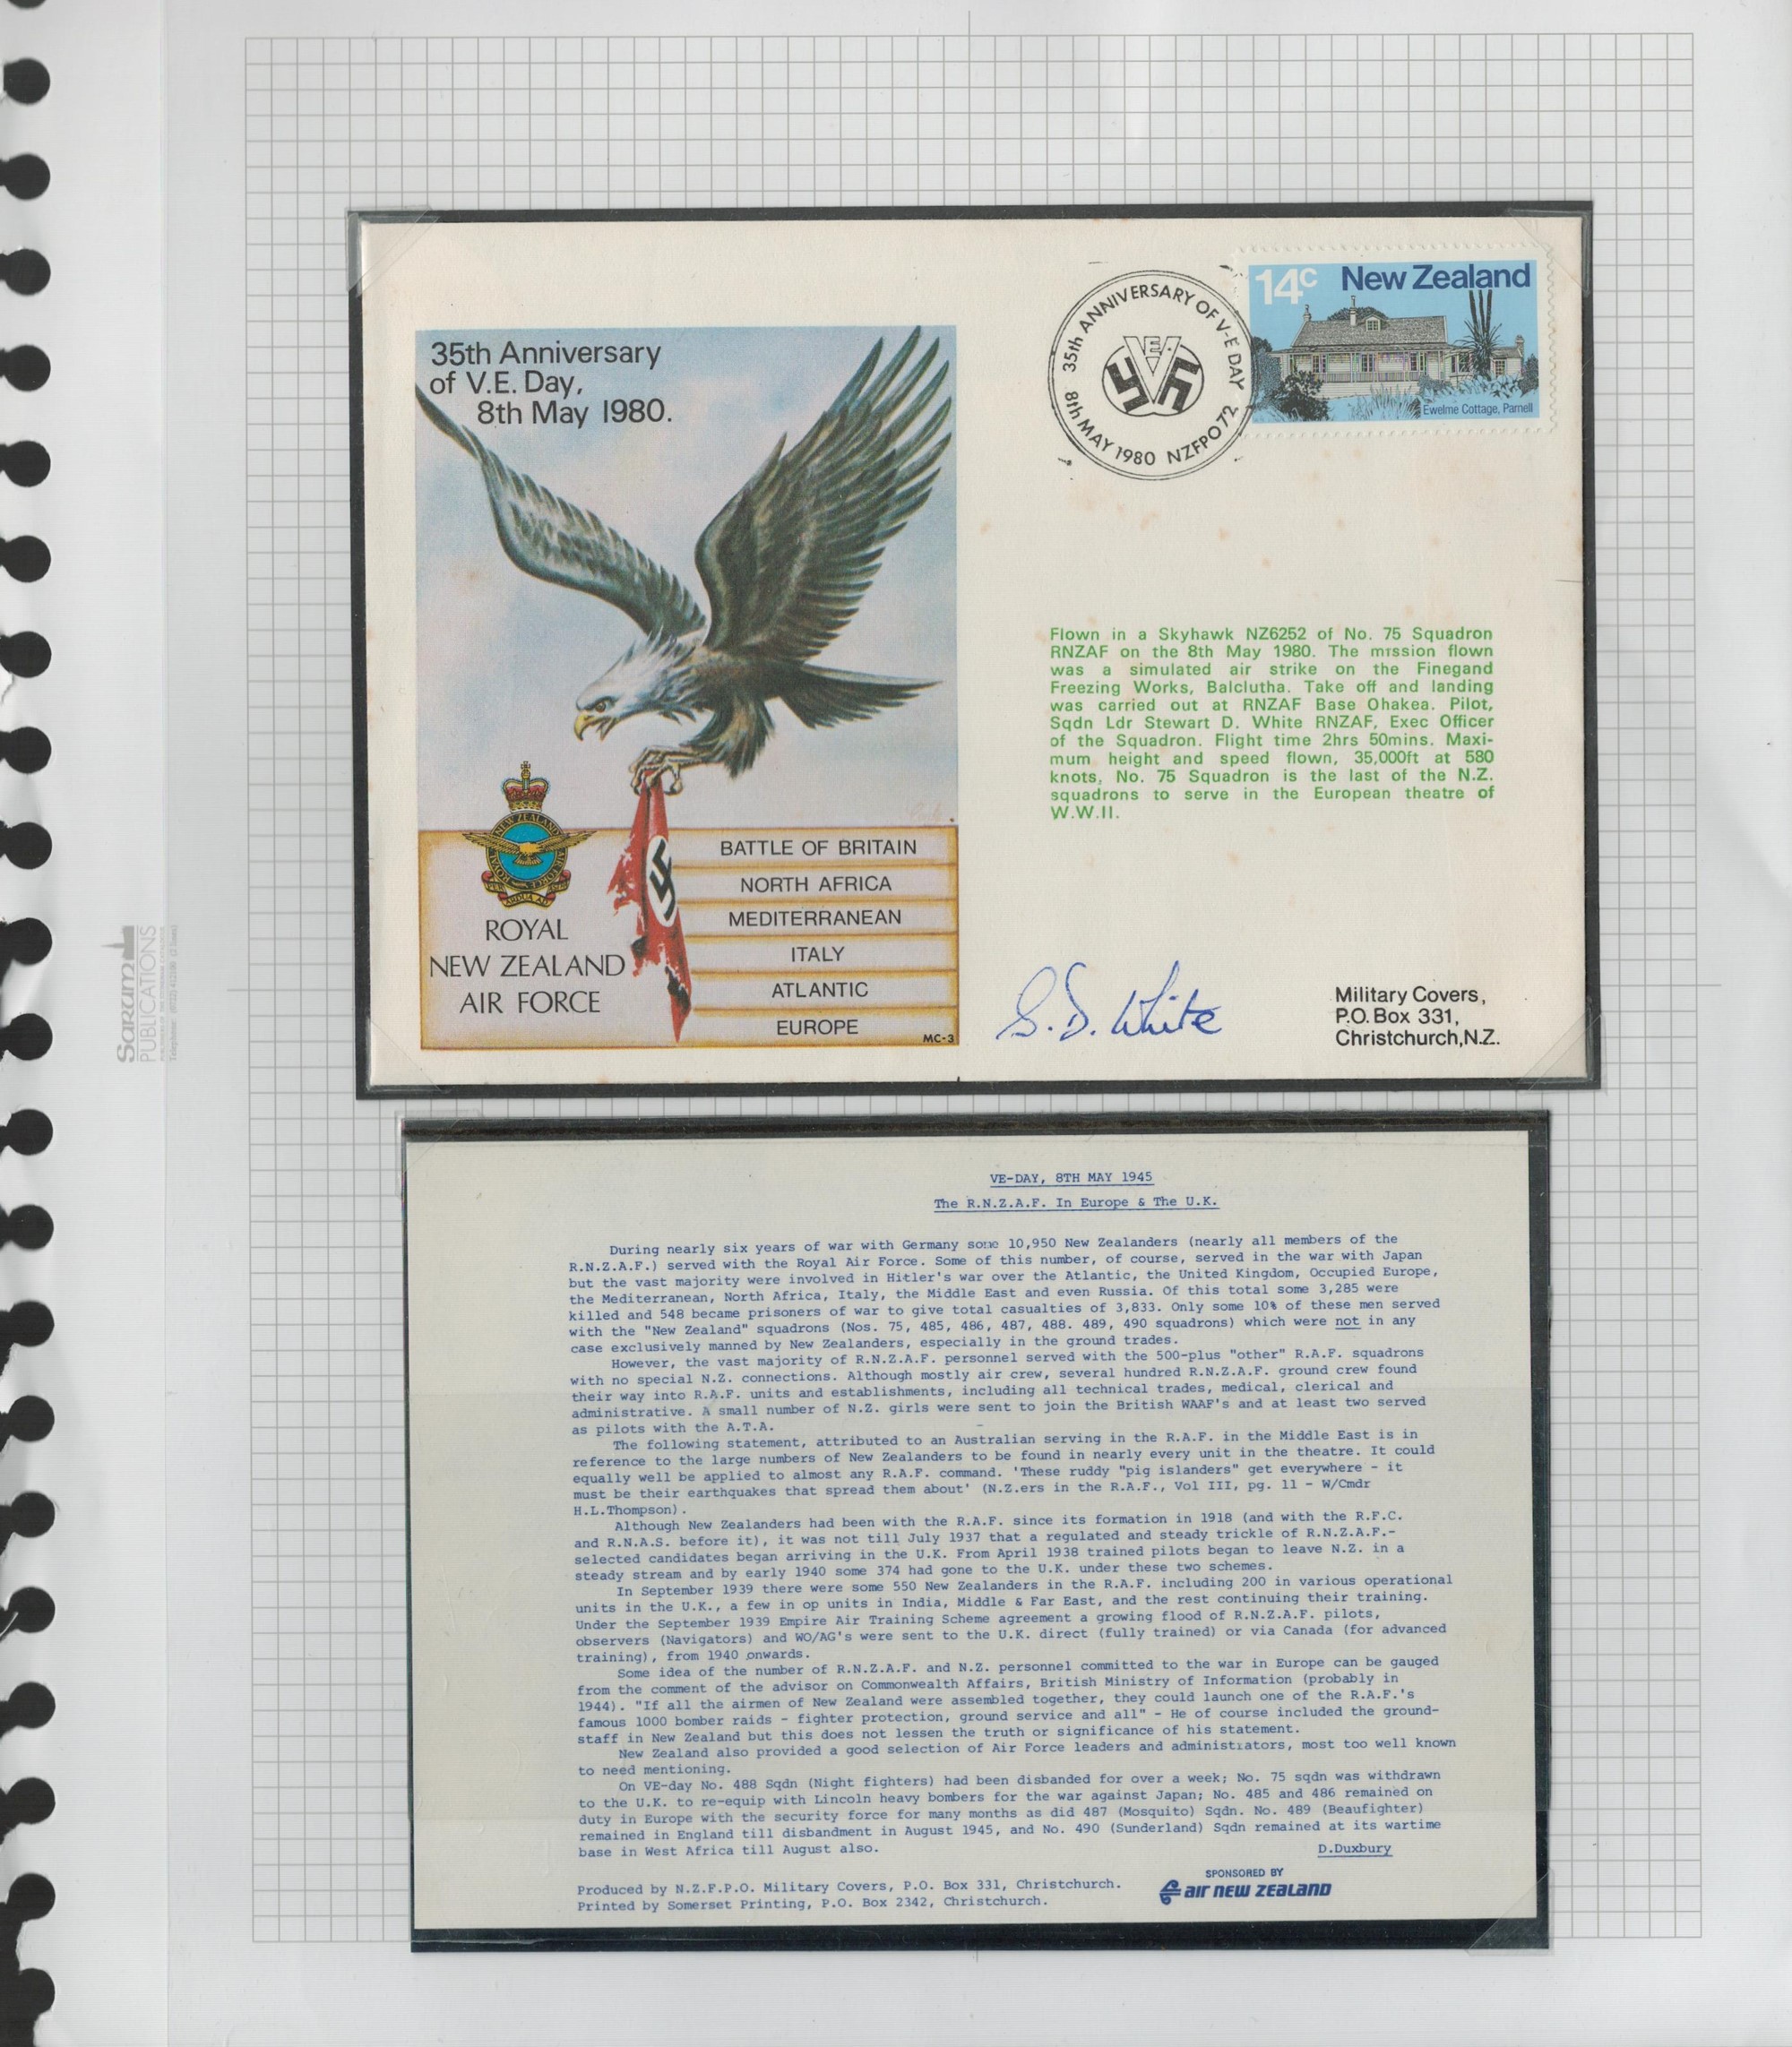 Sqn Ldr S White RNZAF signed 1980 New Zealand 35th ann VE Day flown cover. Set with description card